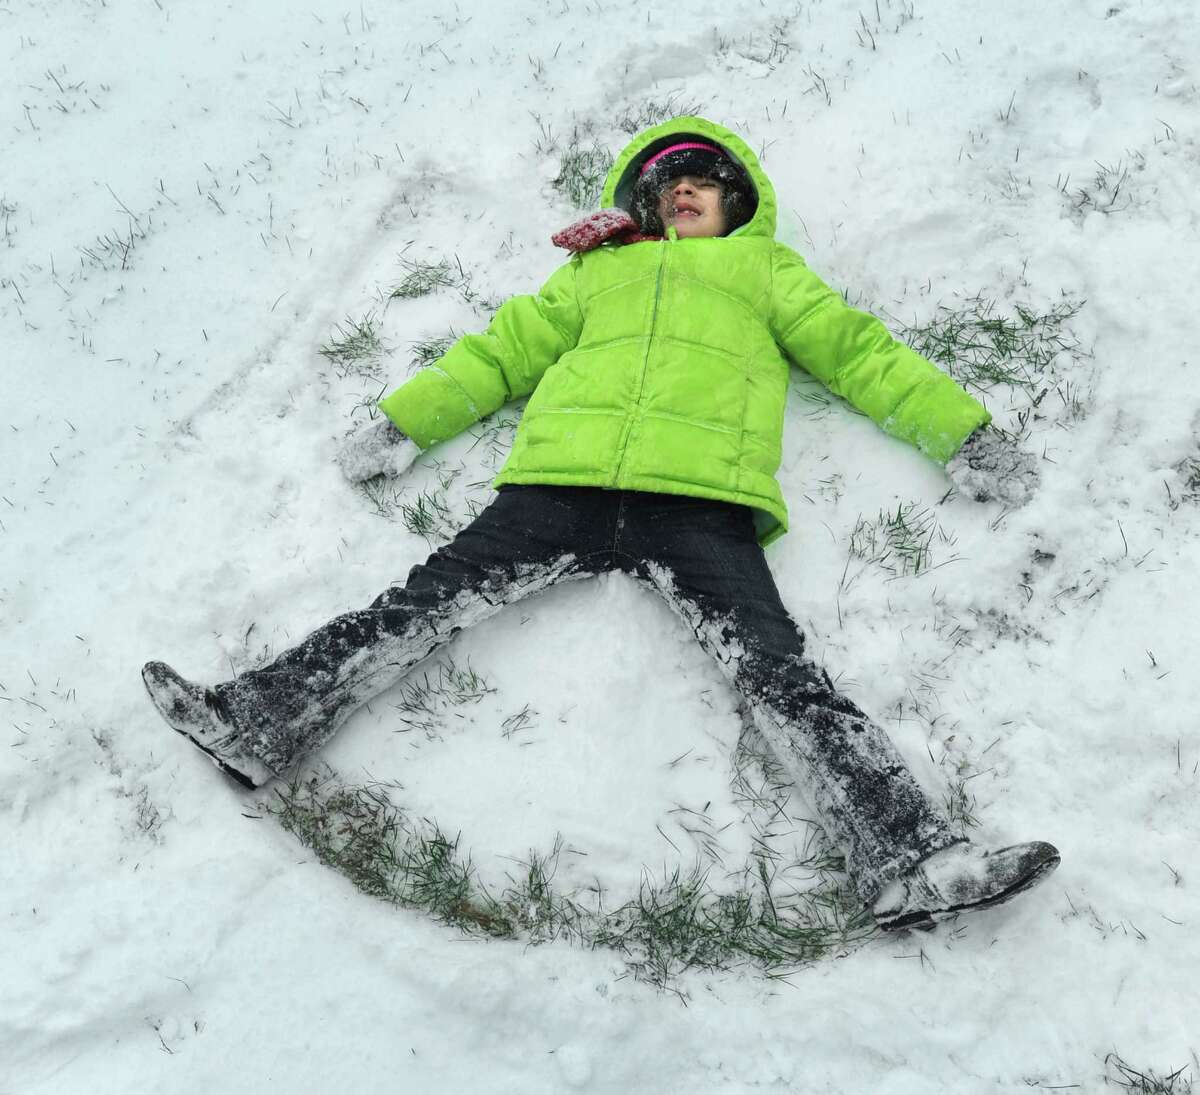 Christine Billerback, 4, makes a snow angel in the from yard of her Park Avenue apartment in Danbury, Saturday, morning, January 23, 2016. Snowfall in Danbury was moderate before Noon on Saturday, January 23, 2016.